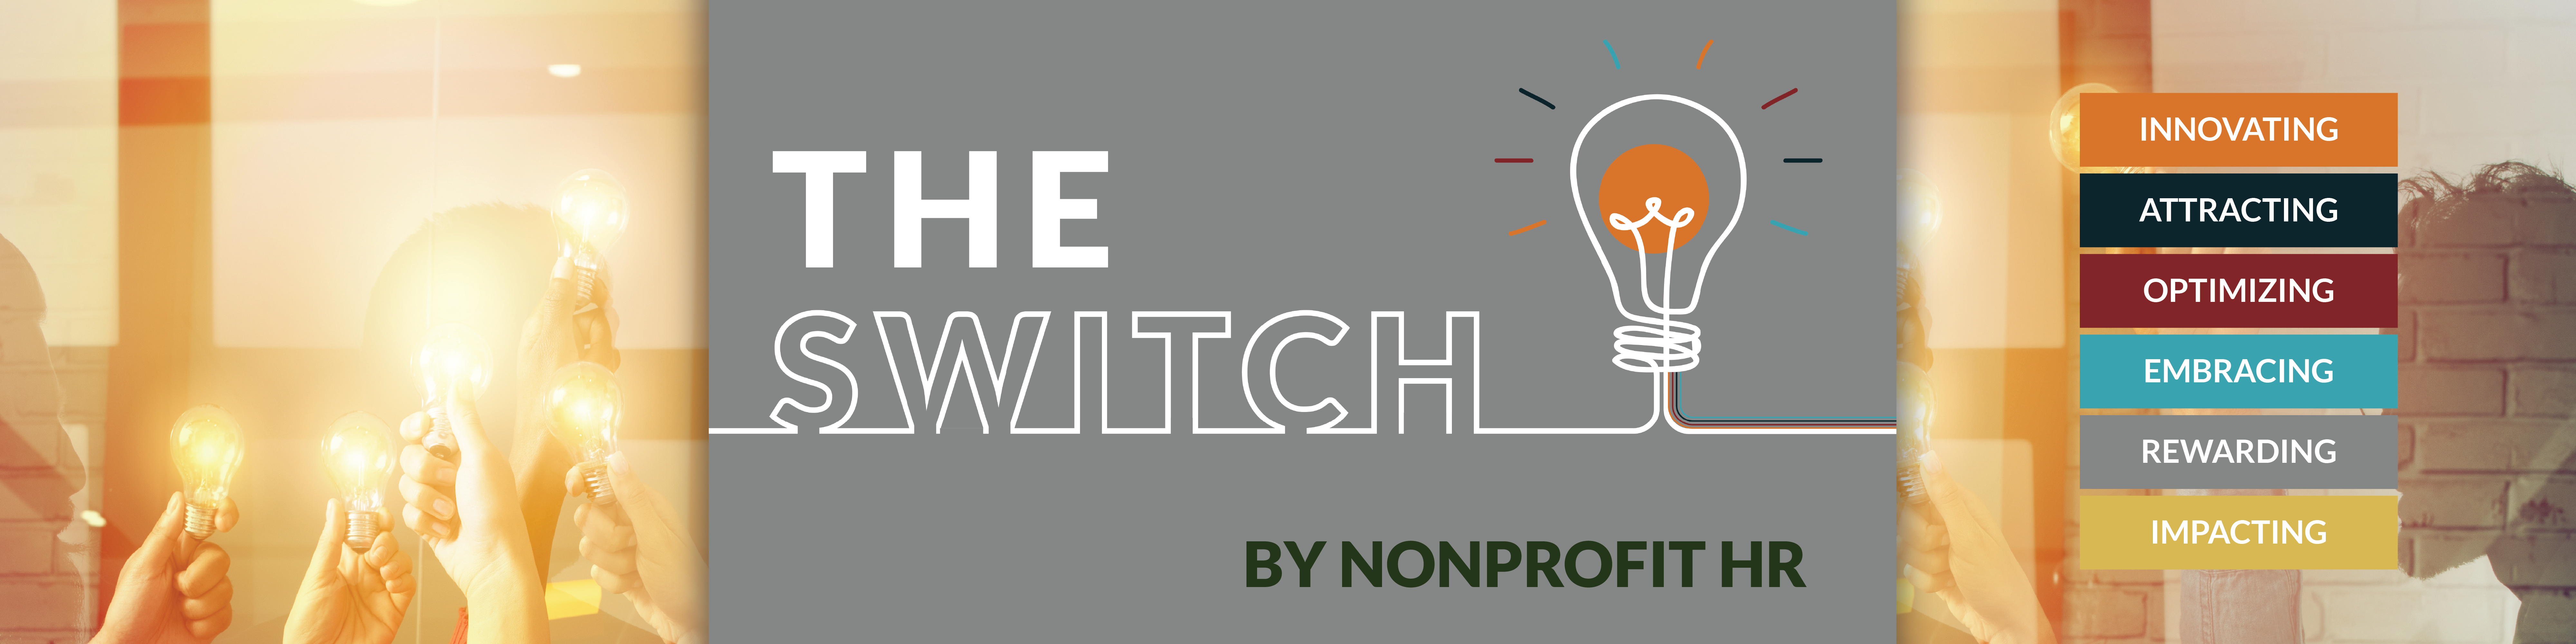 The switch by nonprofit HR